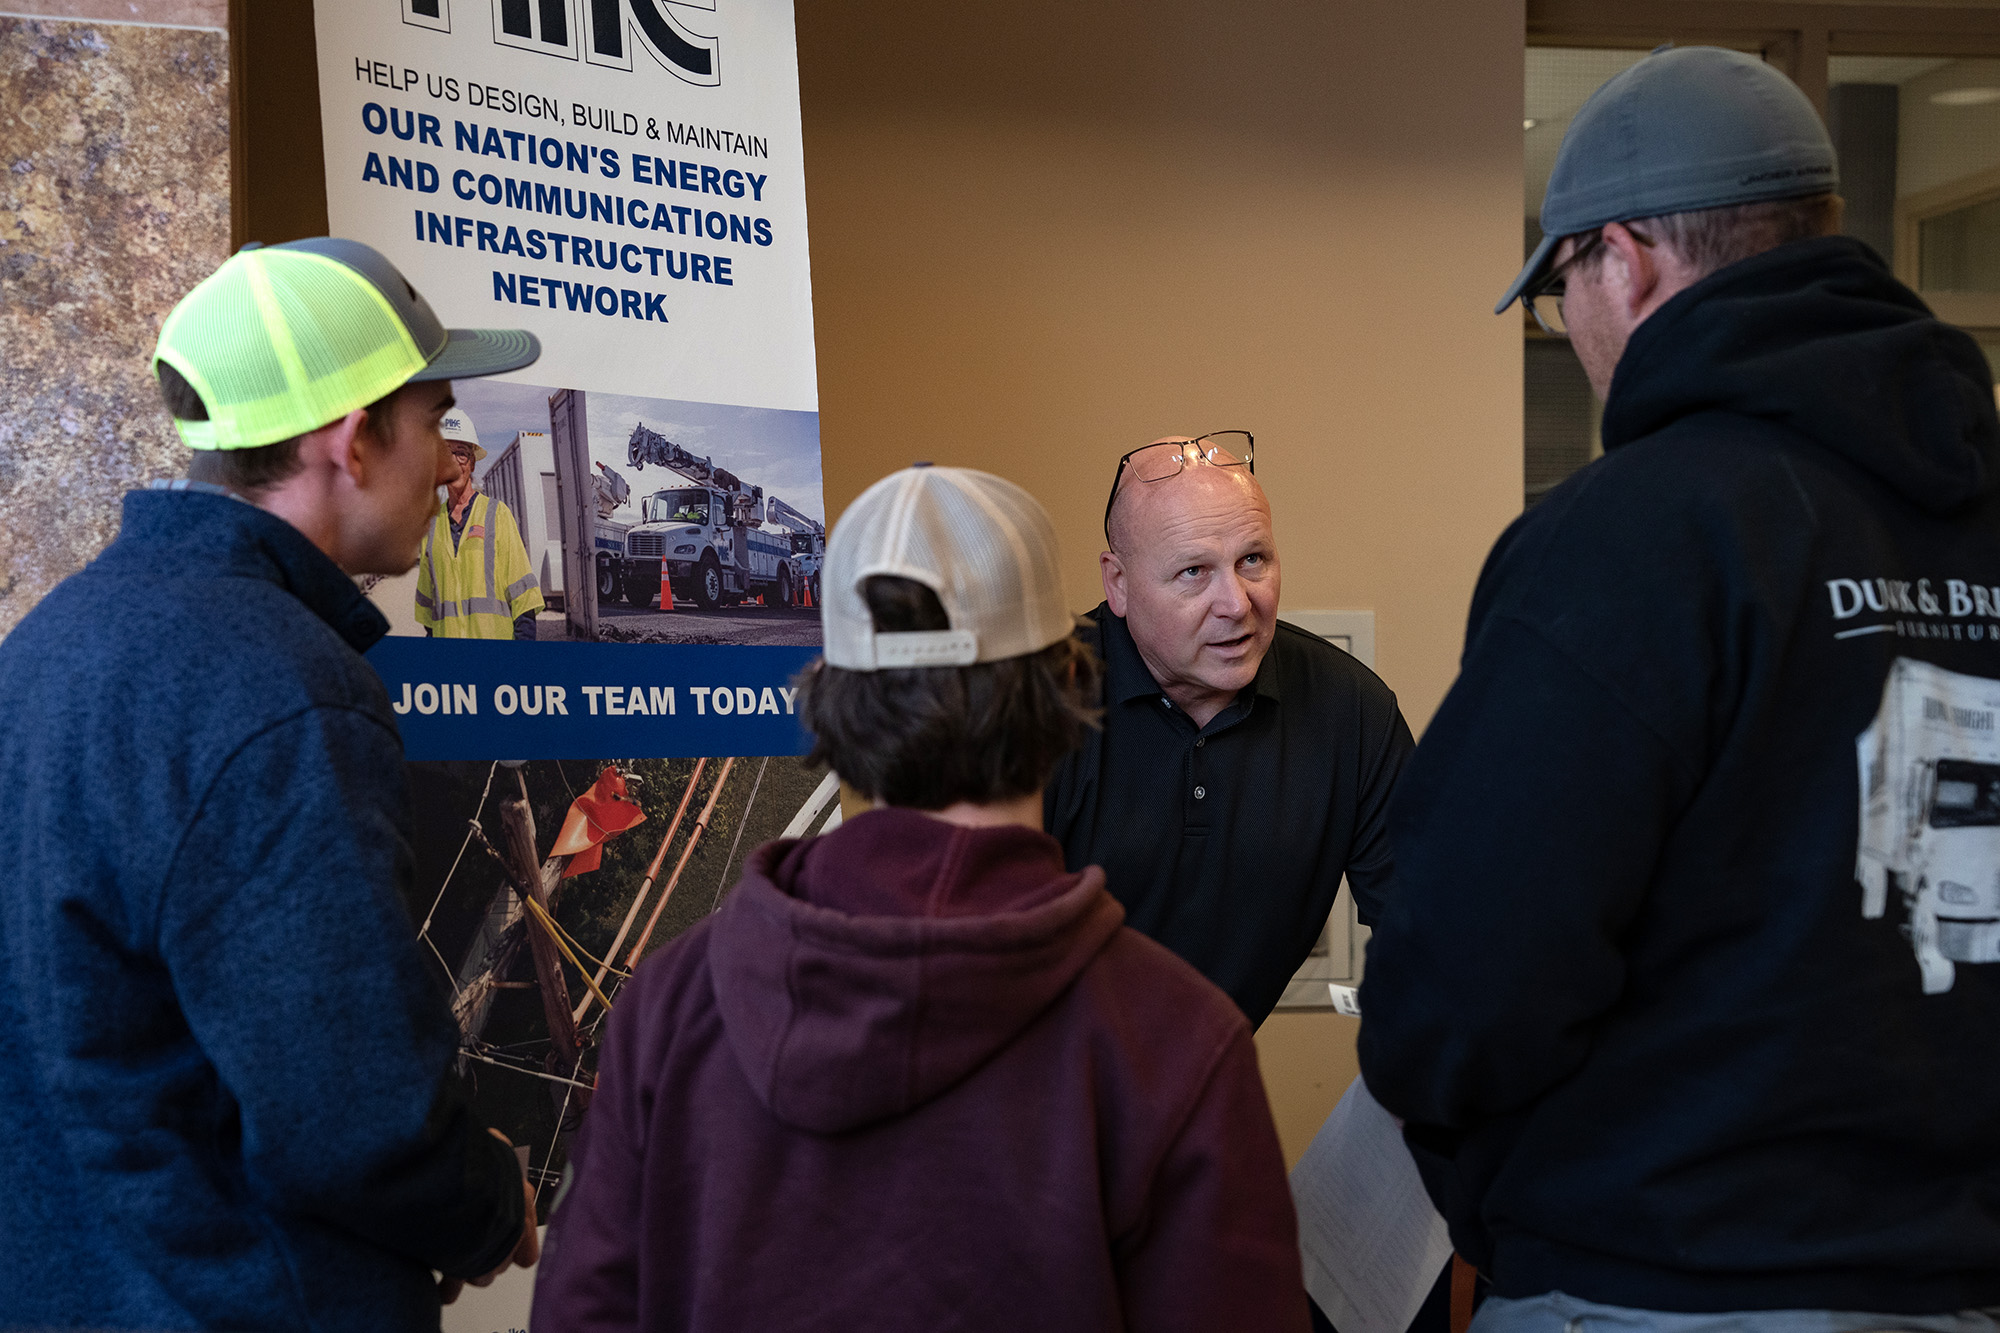 A representative speaks with jobseekers during a Construction Career Fair at Cape Fear Community College in Wilmington, North Carolina, US, on March 15.